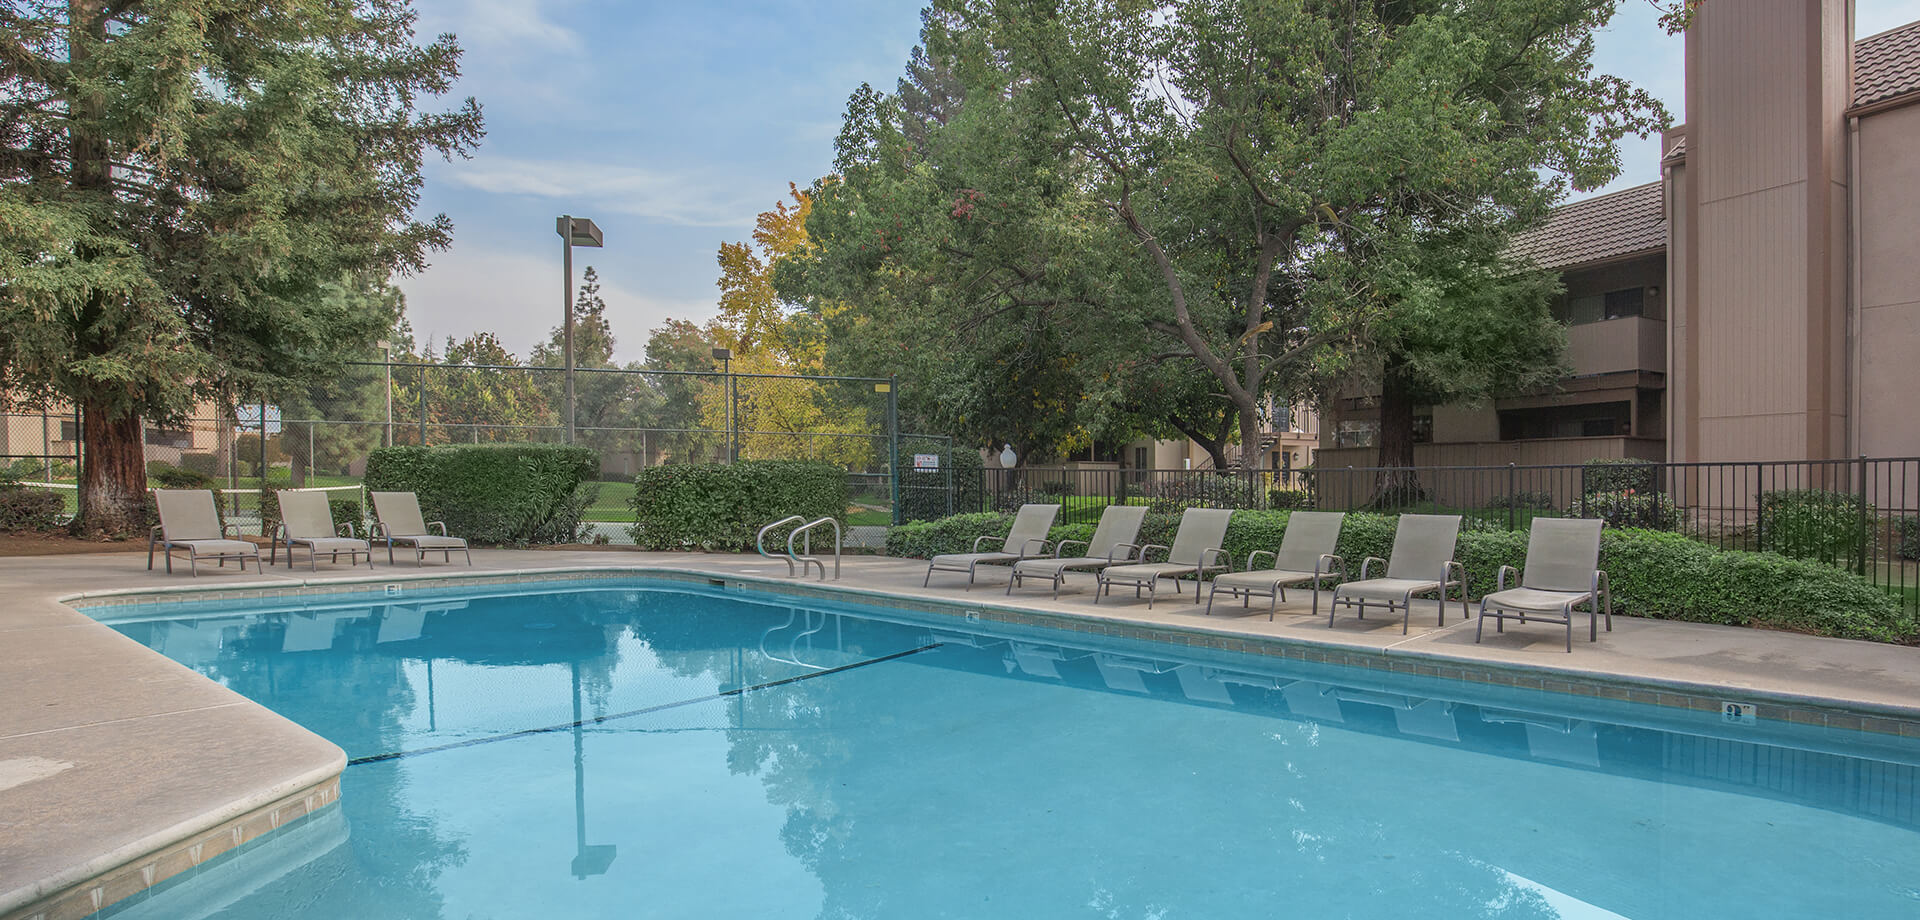 Riverview Garden Apartments Apartments In Fresno Ca